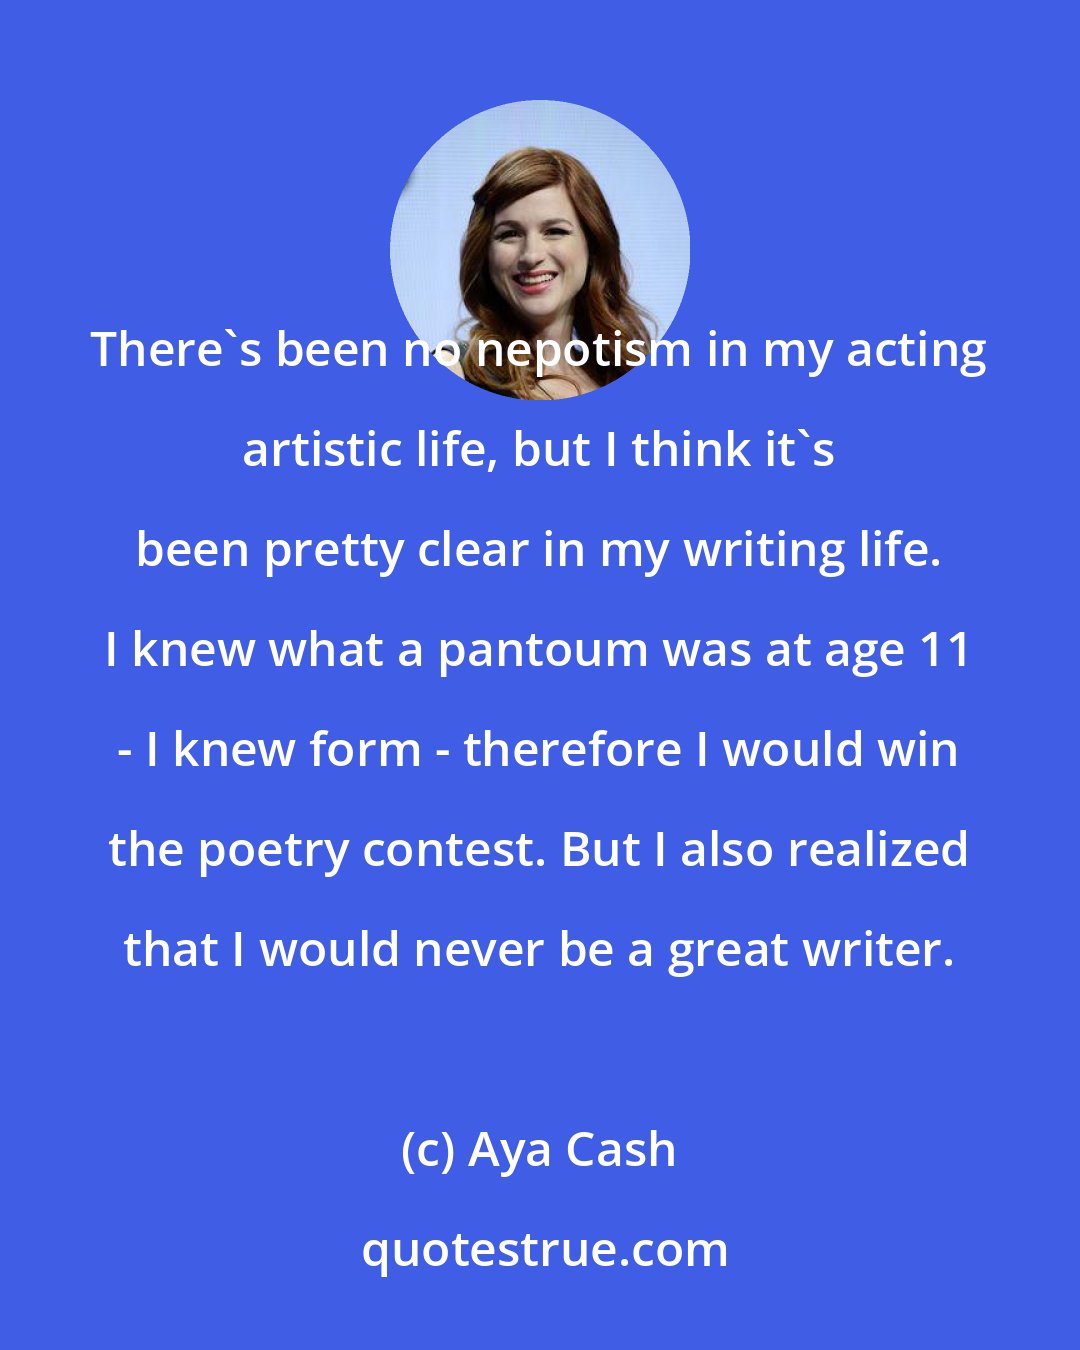 Aya Cash: There's been no nepotism in my acting artistic life, but I think it's been pretty clear in my writing life. I knew what a pantoum was at age 11 - I knew form - therefore I would win the poetry contest. But I also realized that I would never be a great writer.